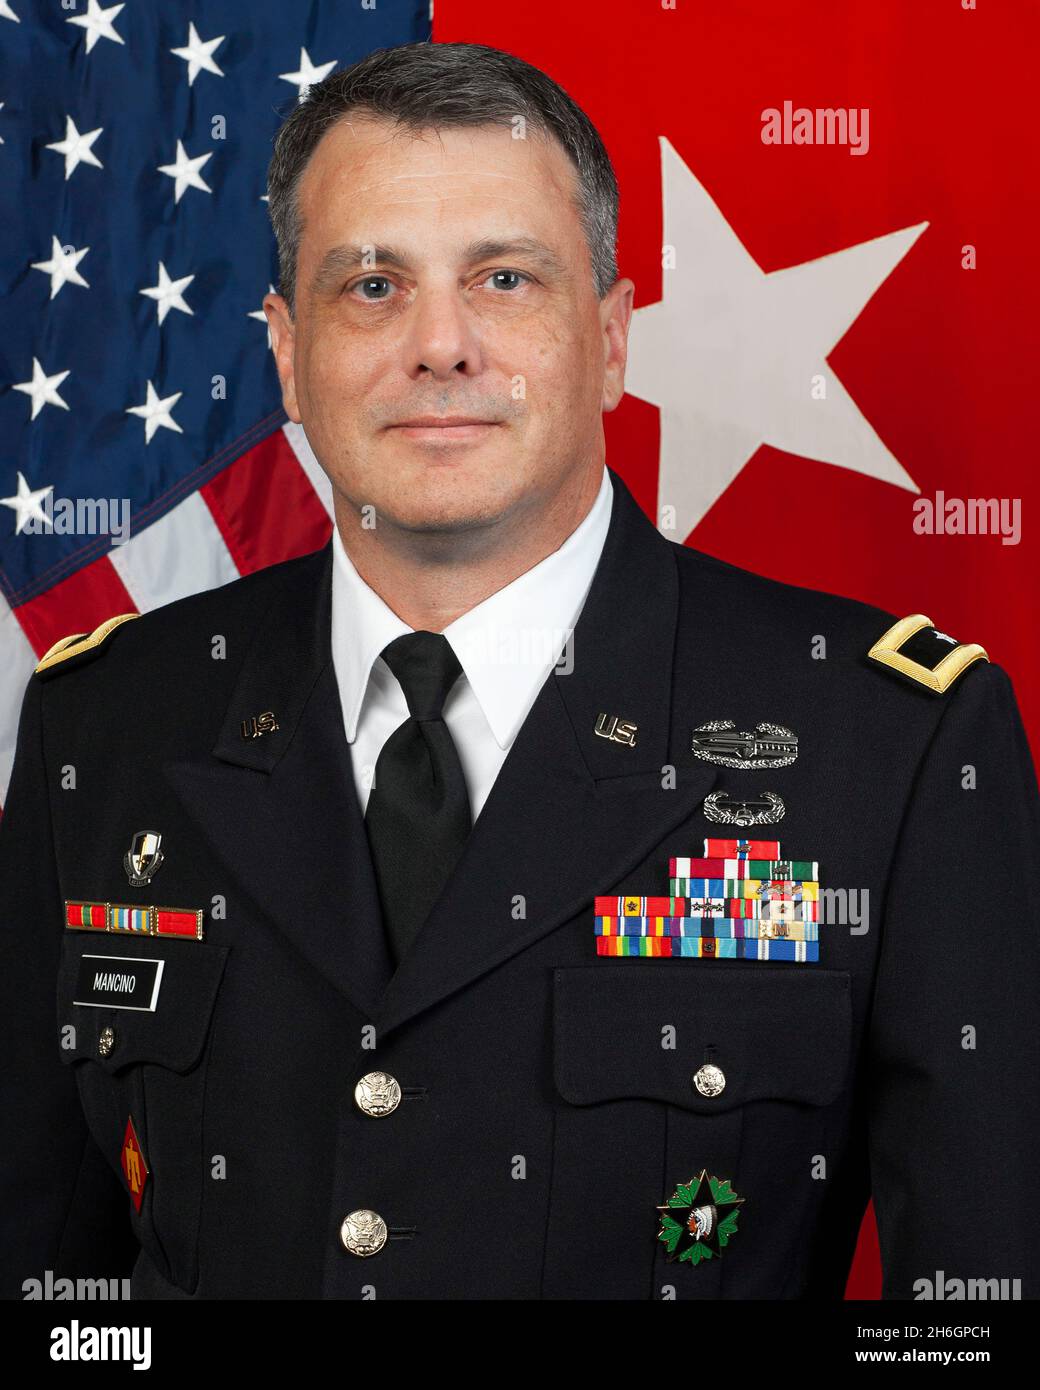 Oklahoma City, United States of America. 07 October, 2019. Official portrait of the new Oklahoma National Guard Adjutant Gen. Thomas Mancino October 7, 2019 in Oklahoma City, Oklahoma. Mancino announced that he will refuse to comply with the Pentagon mandate requiring all members of the military to be vaccinated against COVID-19. Credit: Kendall James/DOD/Alamy Live News Stock Photo